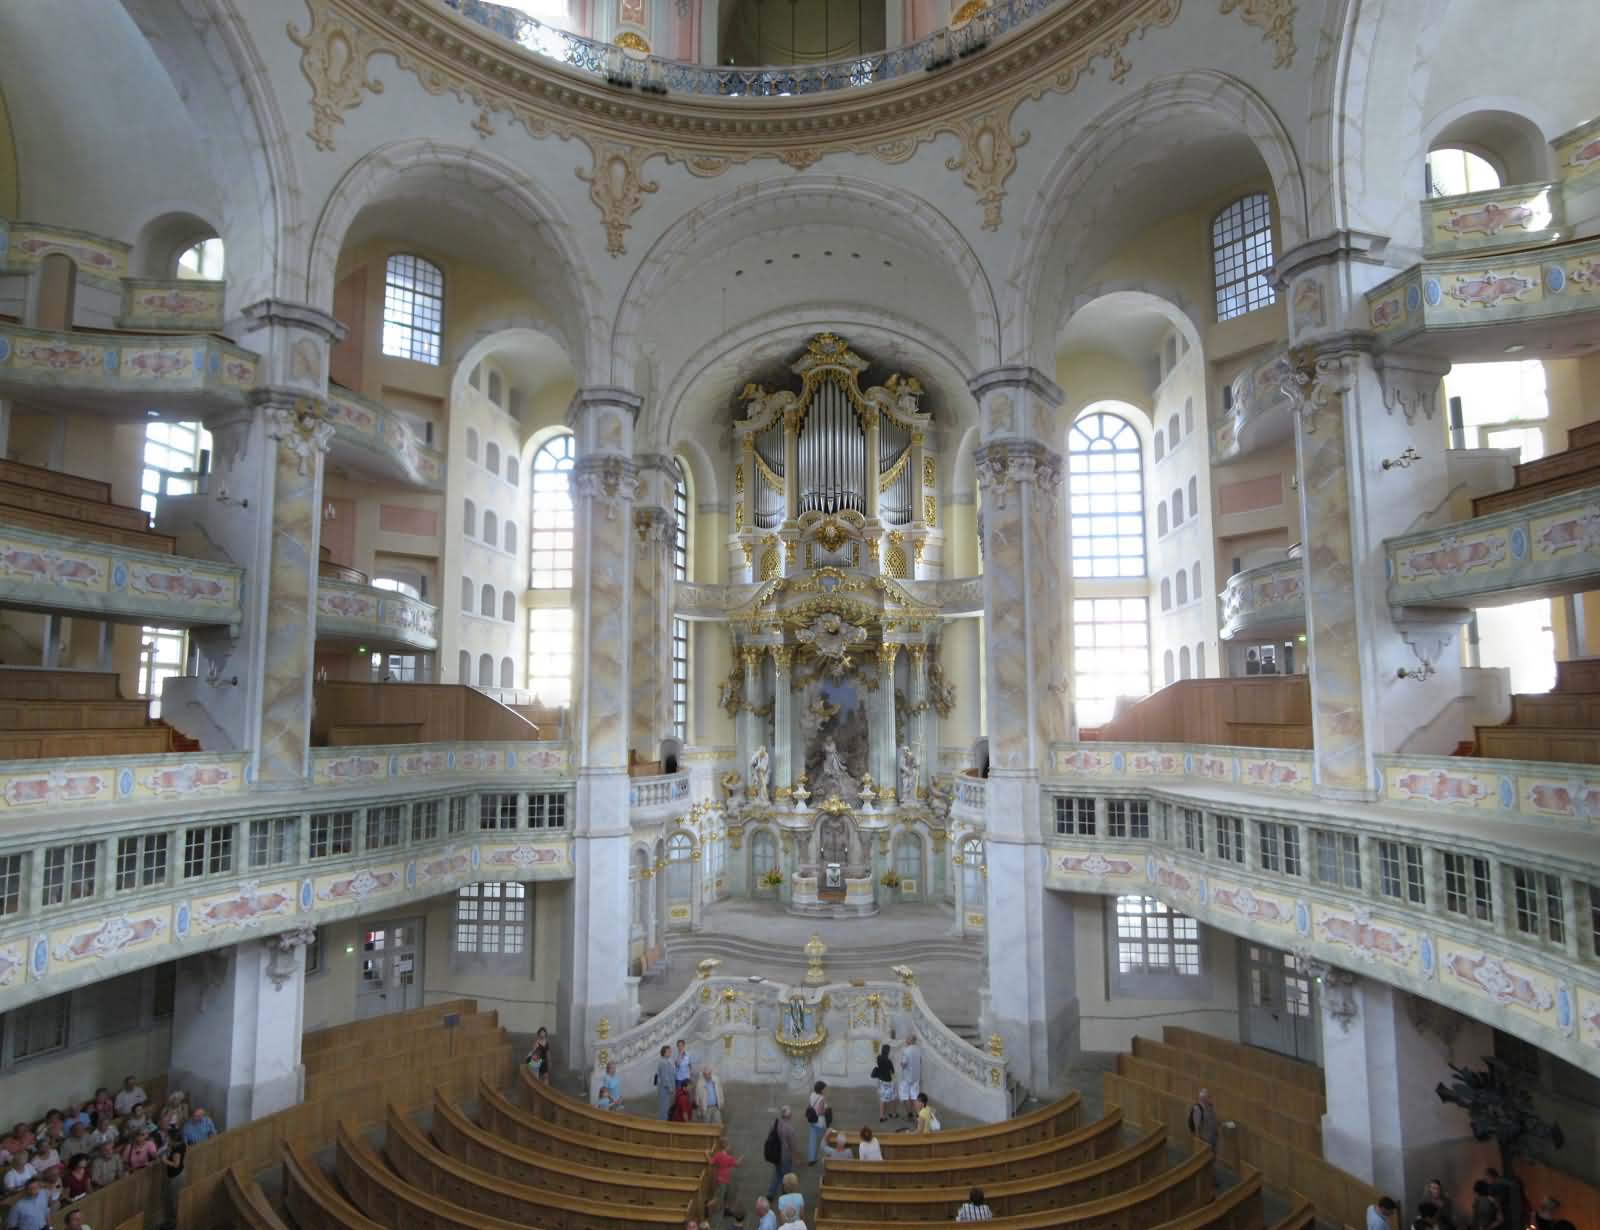 Amazing inside view of the Dresden Frauenkirche